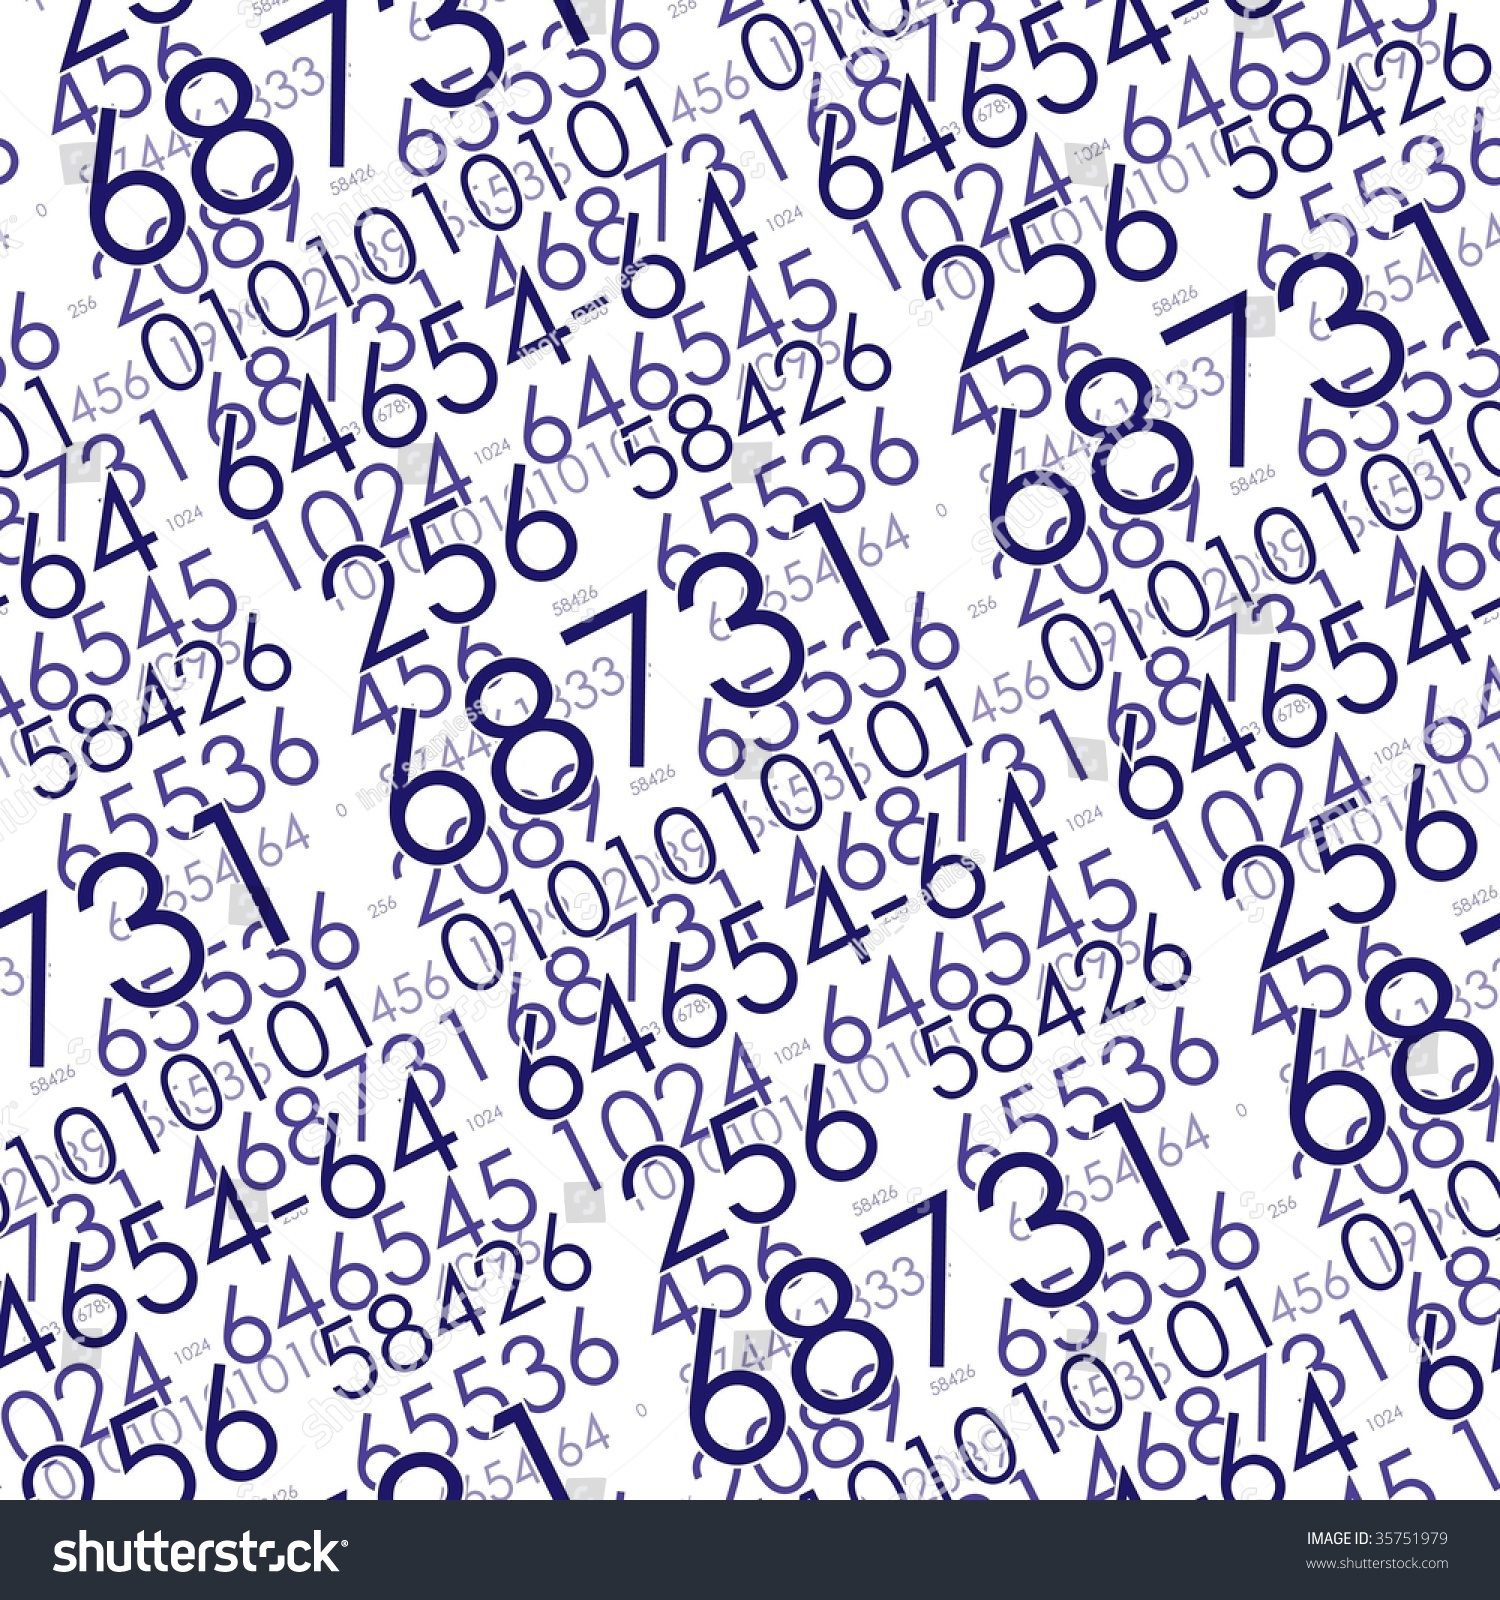 Numbers - Seamless Vector Wallpaper On White - 35751979 : Shutterstock